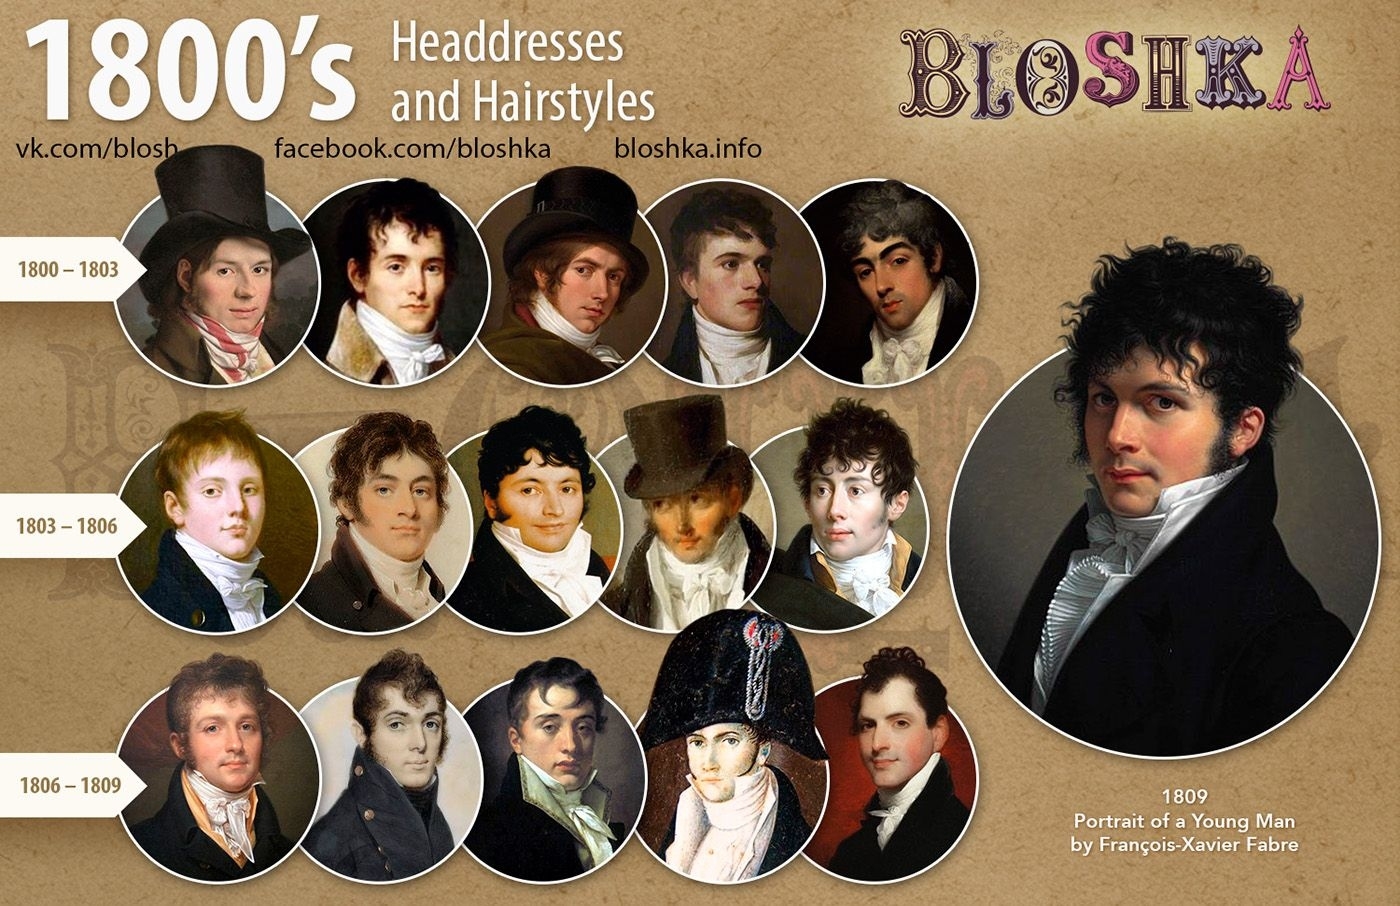 19Th Century. Men's Headdresses And Hairstyles. 1800's | Xix regarding Men Hairstyles In 19Th Century